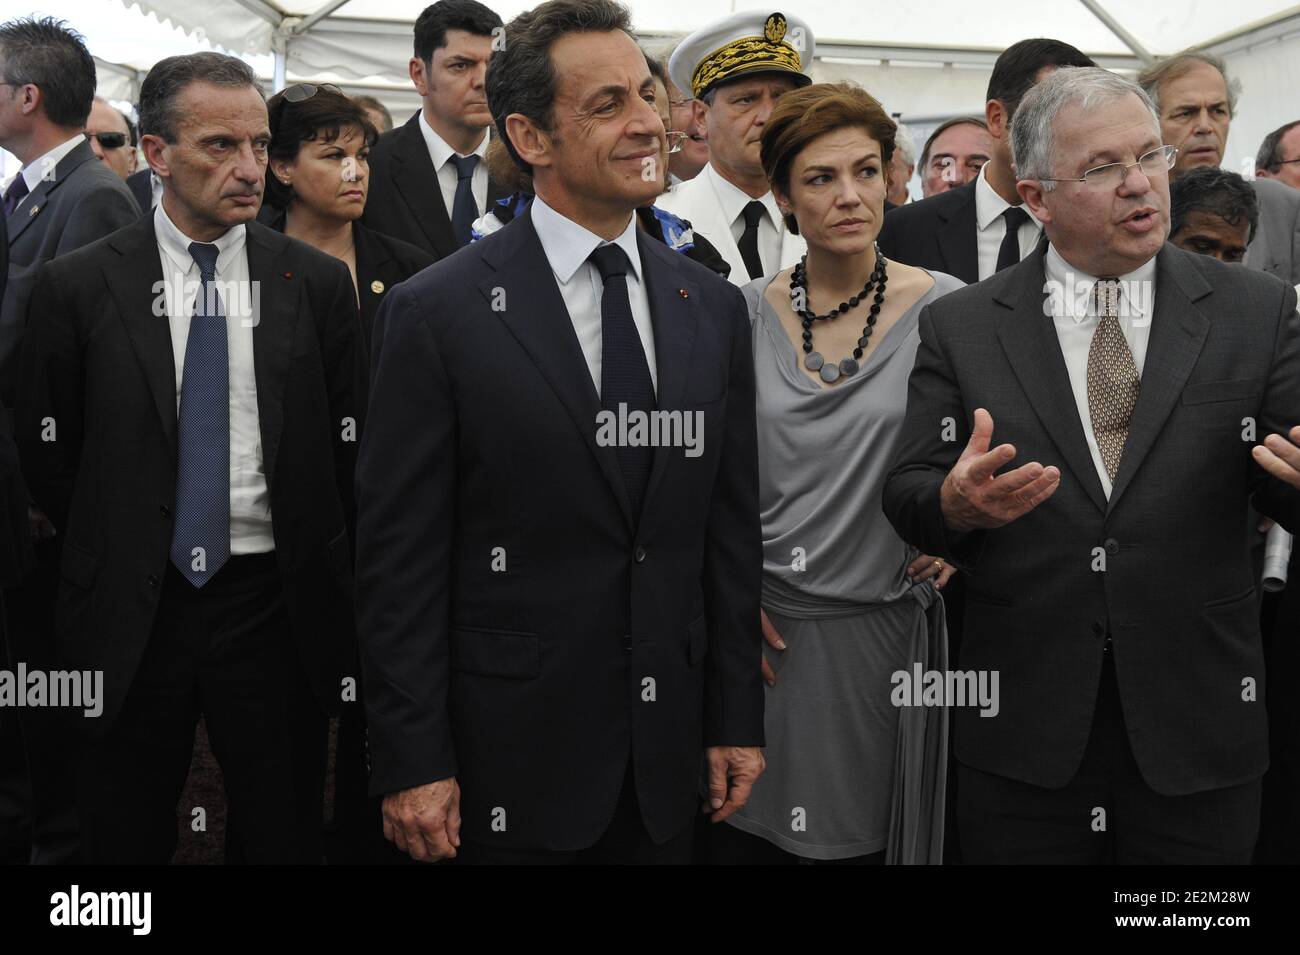 French President Nicolas Sarkozy (2nd L) alongside President of French energy giant EDF (Electricite de France) Henri Proglio (L) and Junior Minister for Ecology Chantal Jouanno (2nd R) tours the AKUO photovoltaic site in Saint-Pierre, French overseas department La Reunion, on January 19, 2010, during his official two-day trip to the Indian Ocean. Photo by Elodie Gregoire/ABACAPRESS.COM Stock Photo